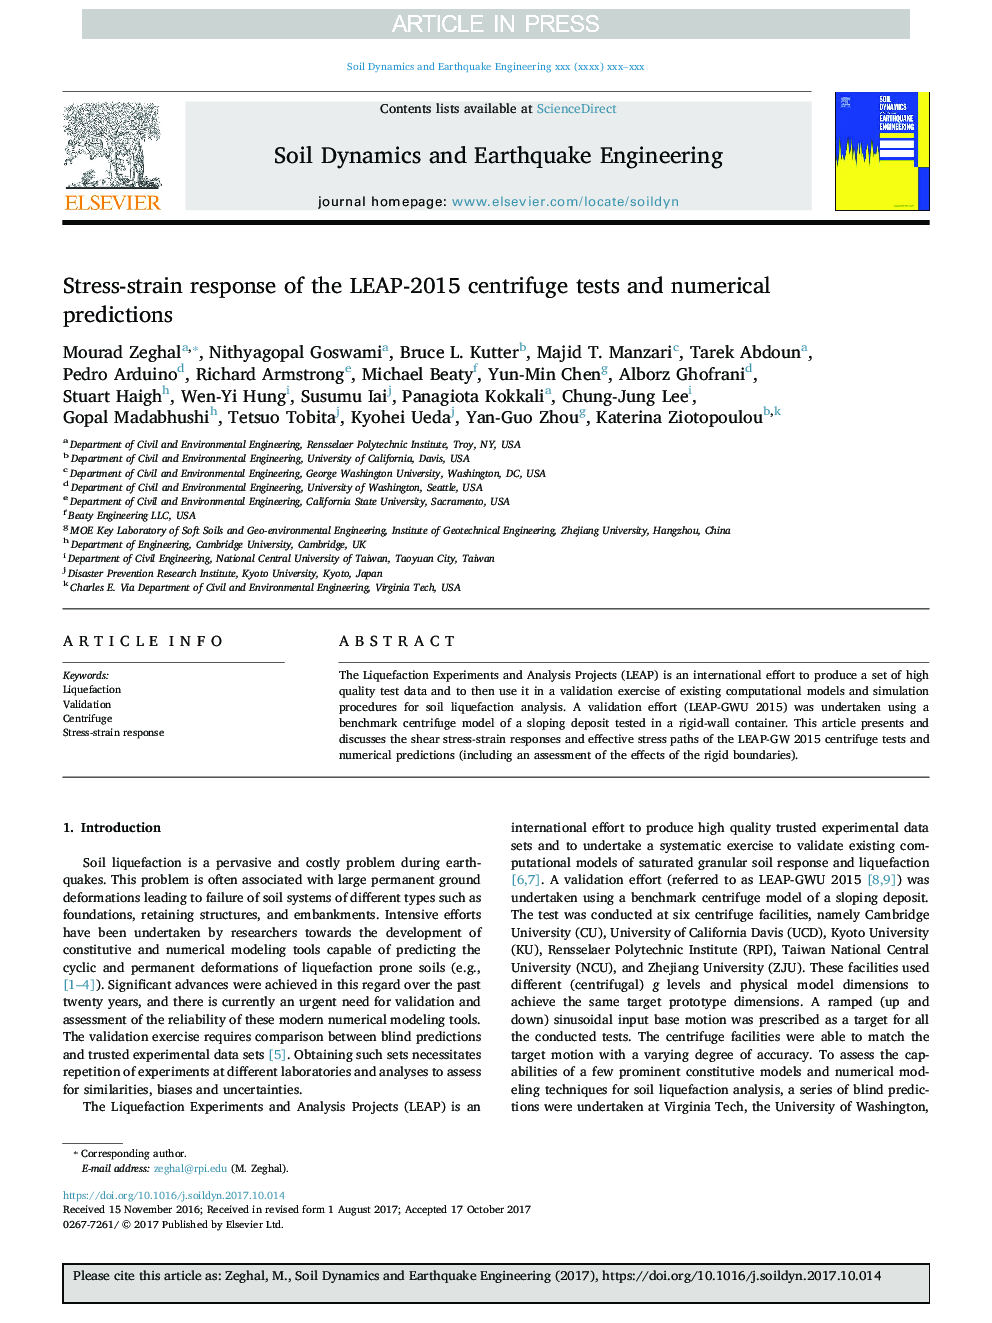 Stress-strain response of the LEAP-2015 centrifuge tests and numerical predictions